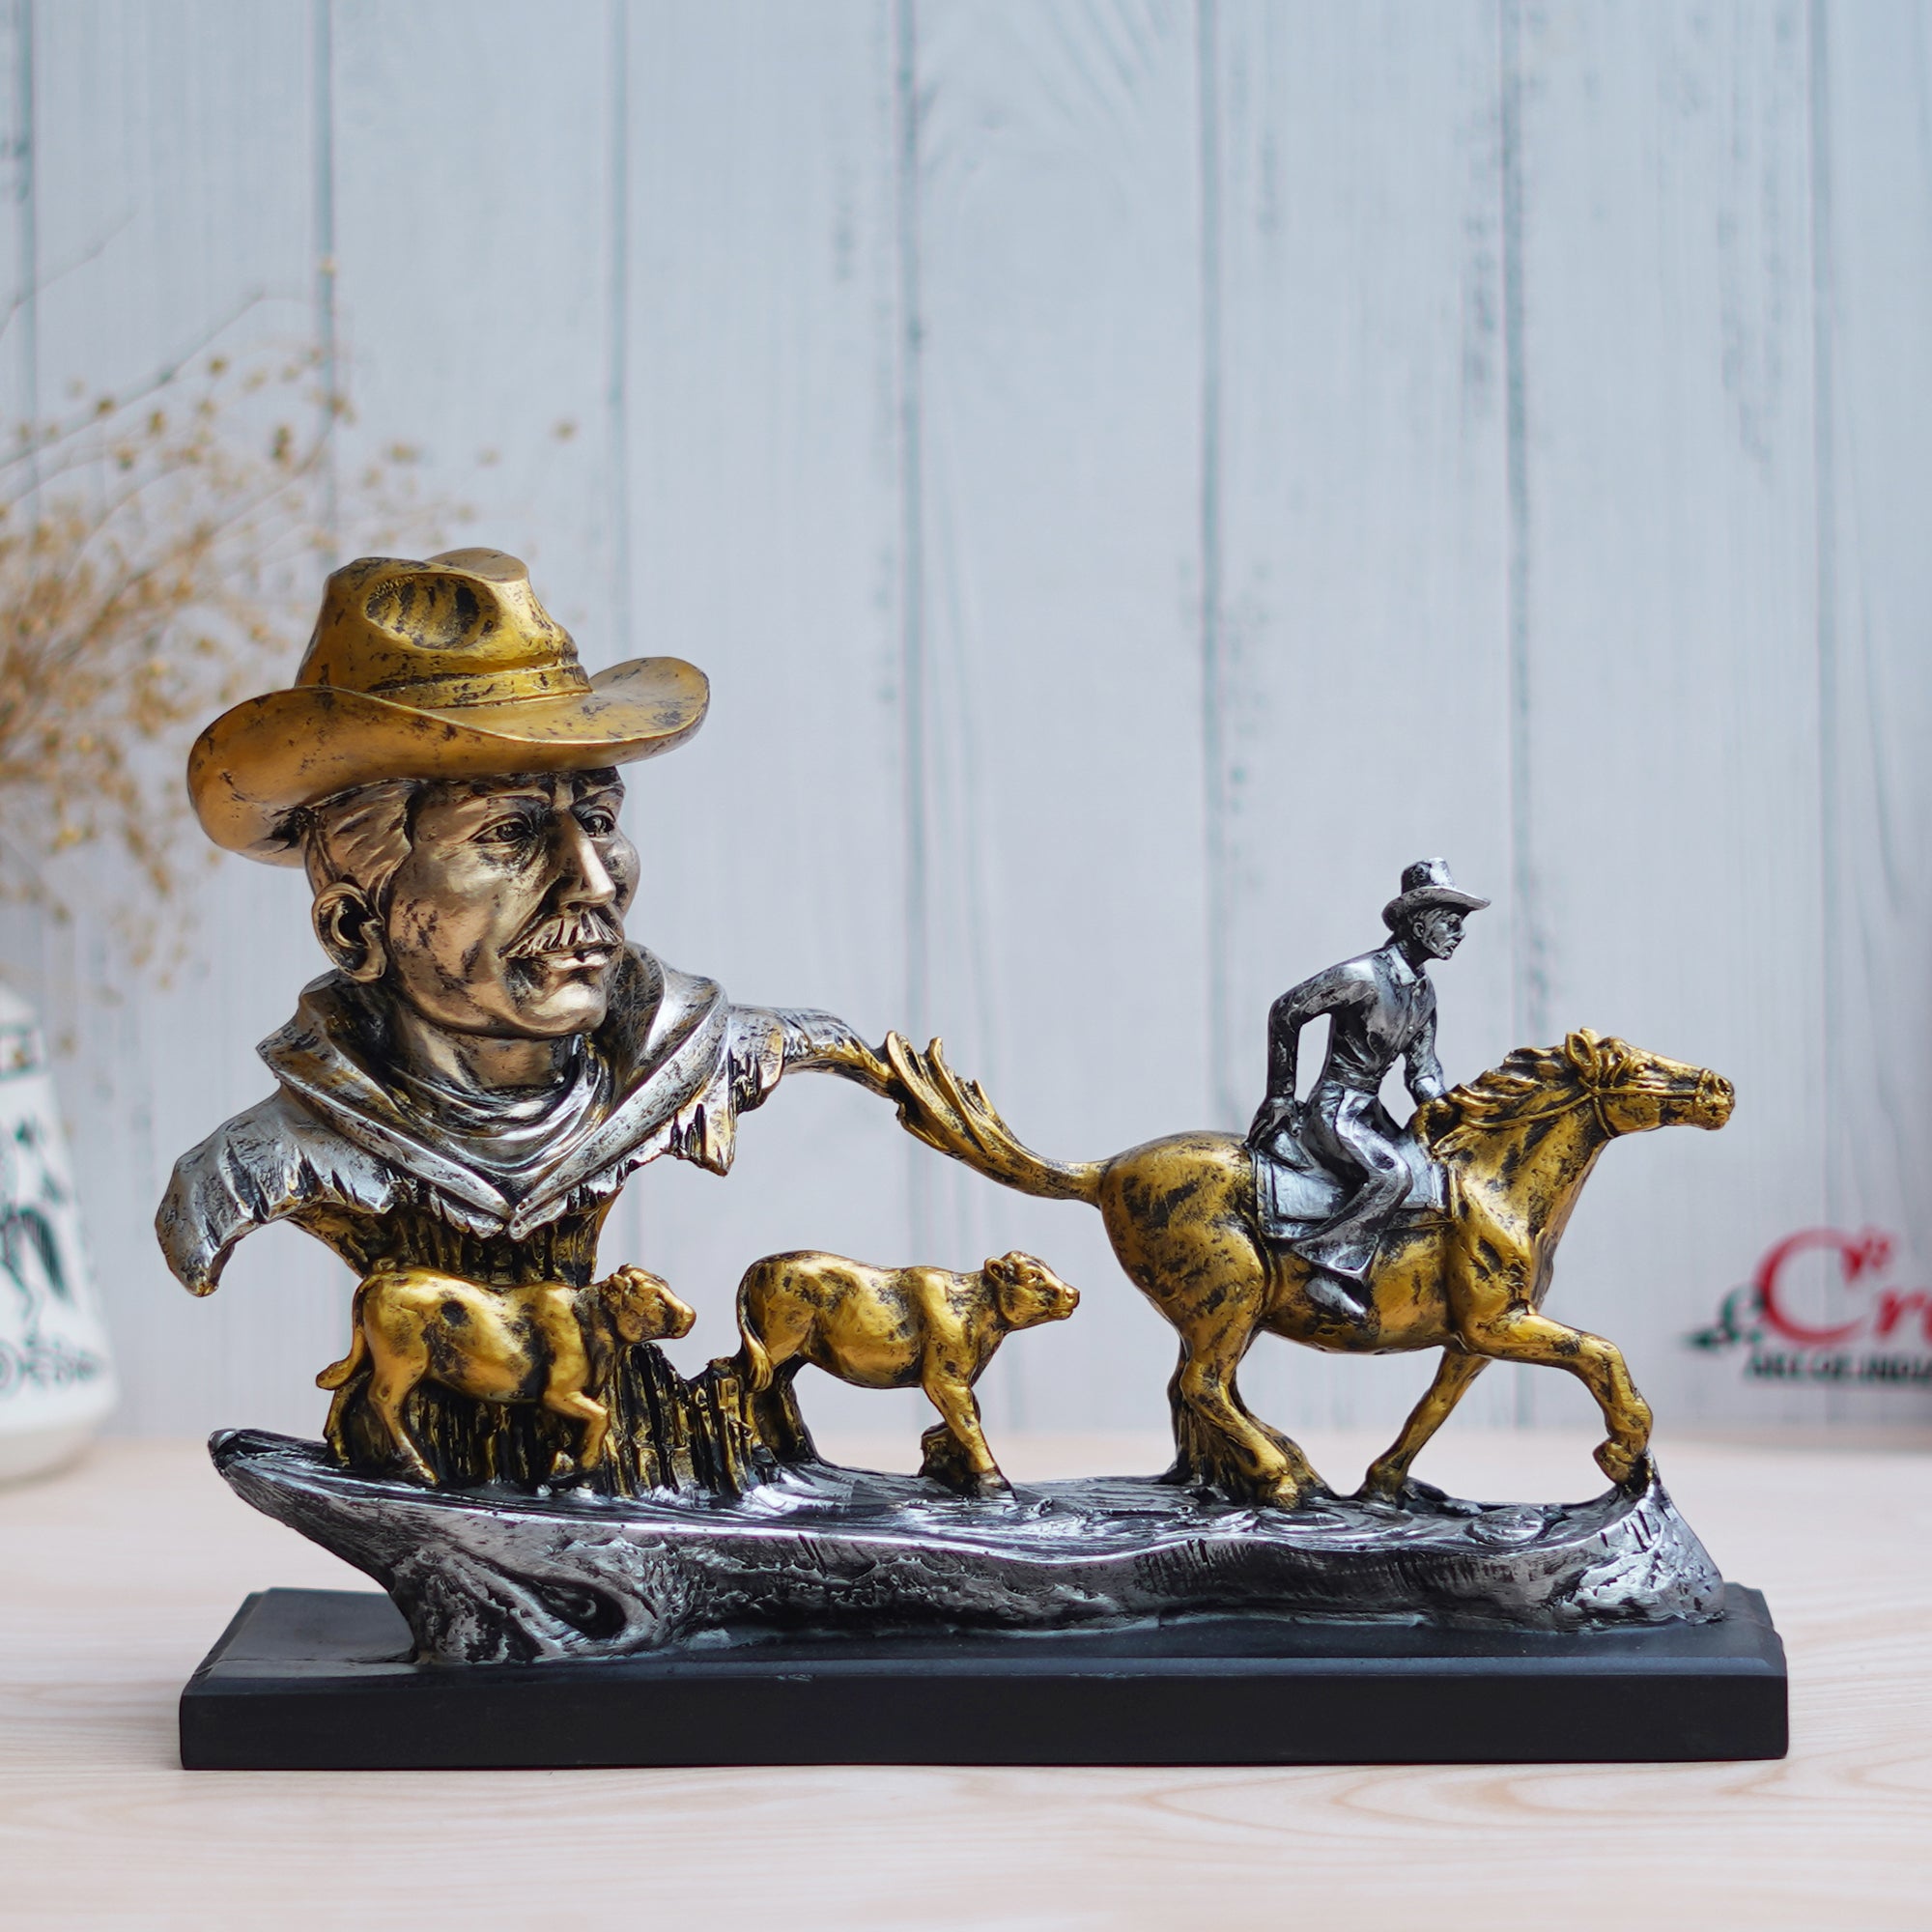 Antique Cowboys Face with Boy Sitting on Running Horse & Cow Statues Decorative Showpiece 1